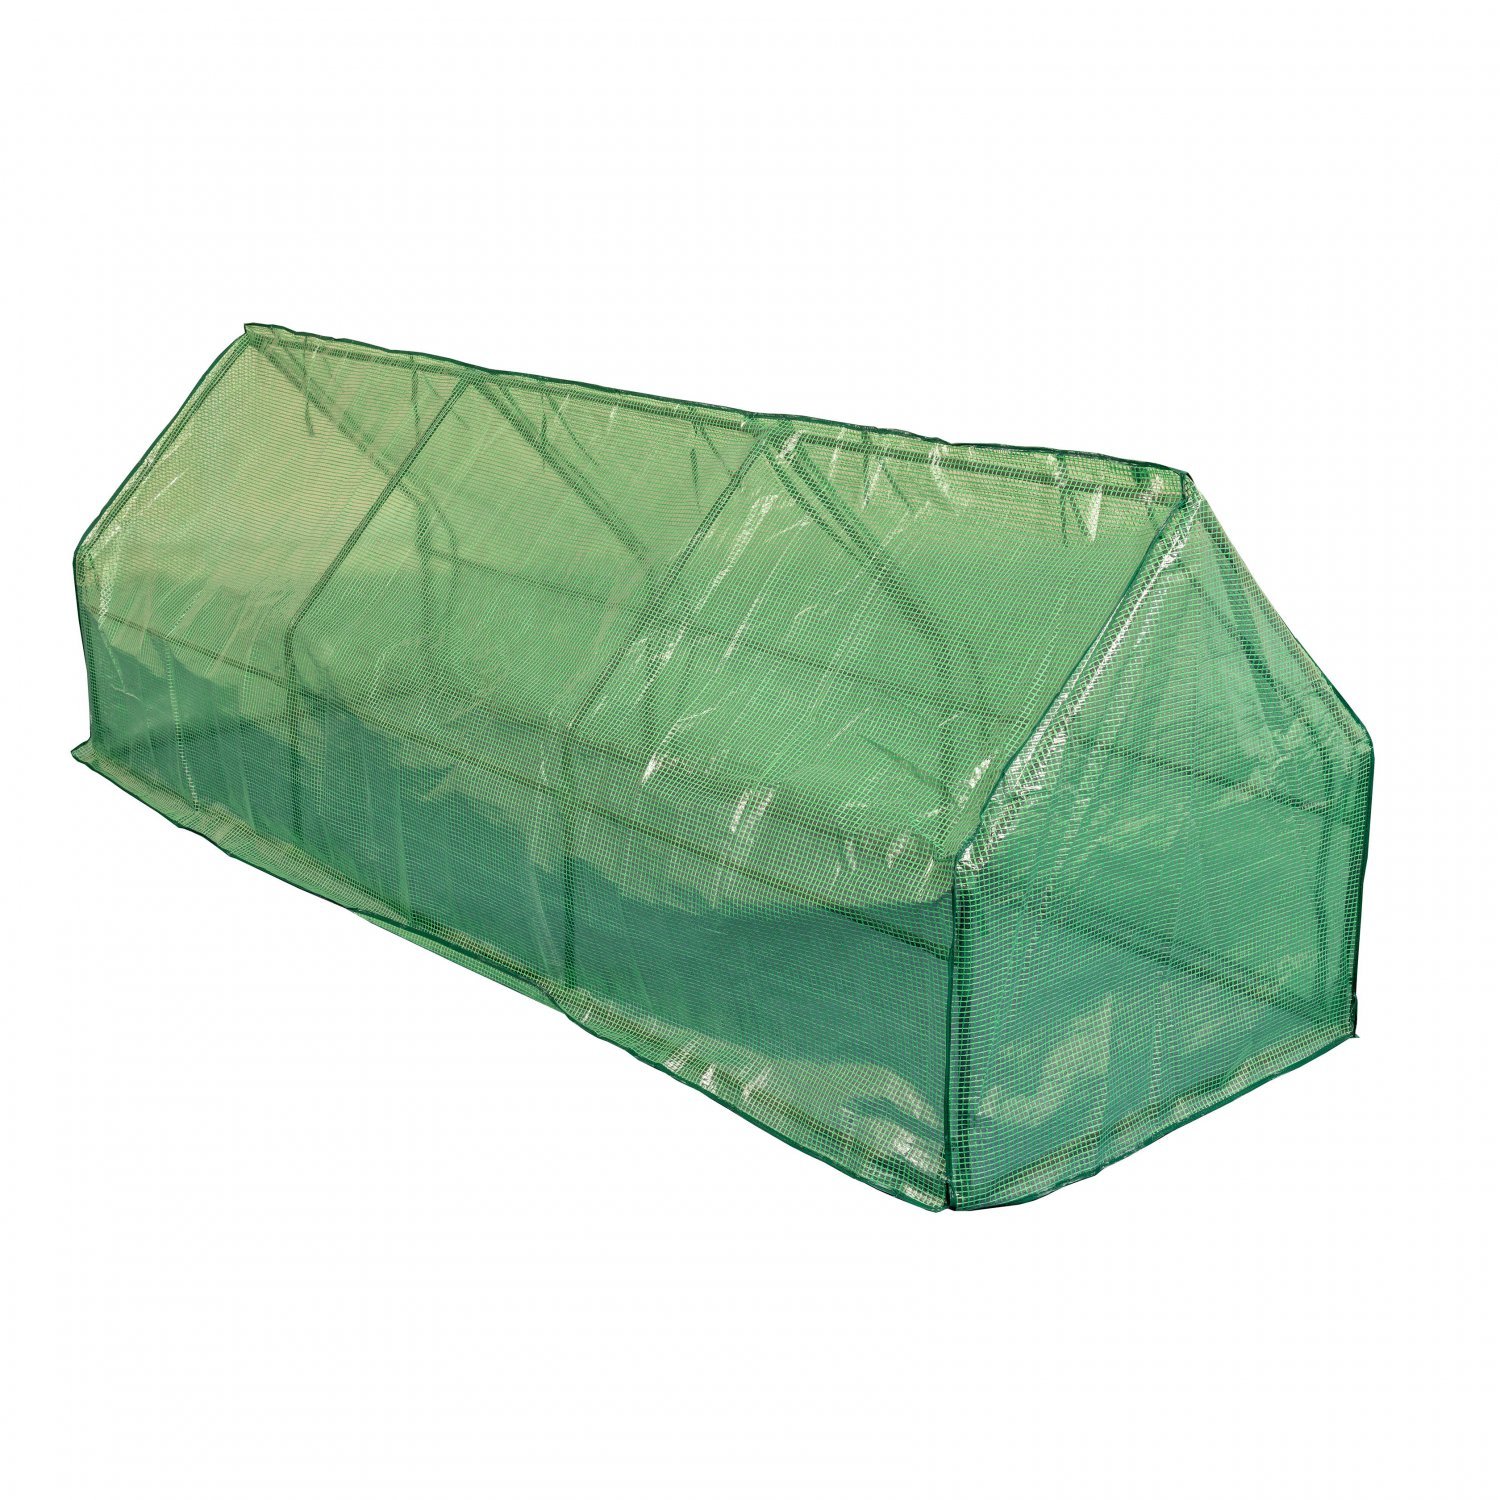 Large Steeple Growhouse Garden Plant Greenhouse with Plastic Mesh Cover - Click Image to Close